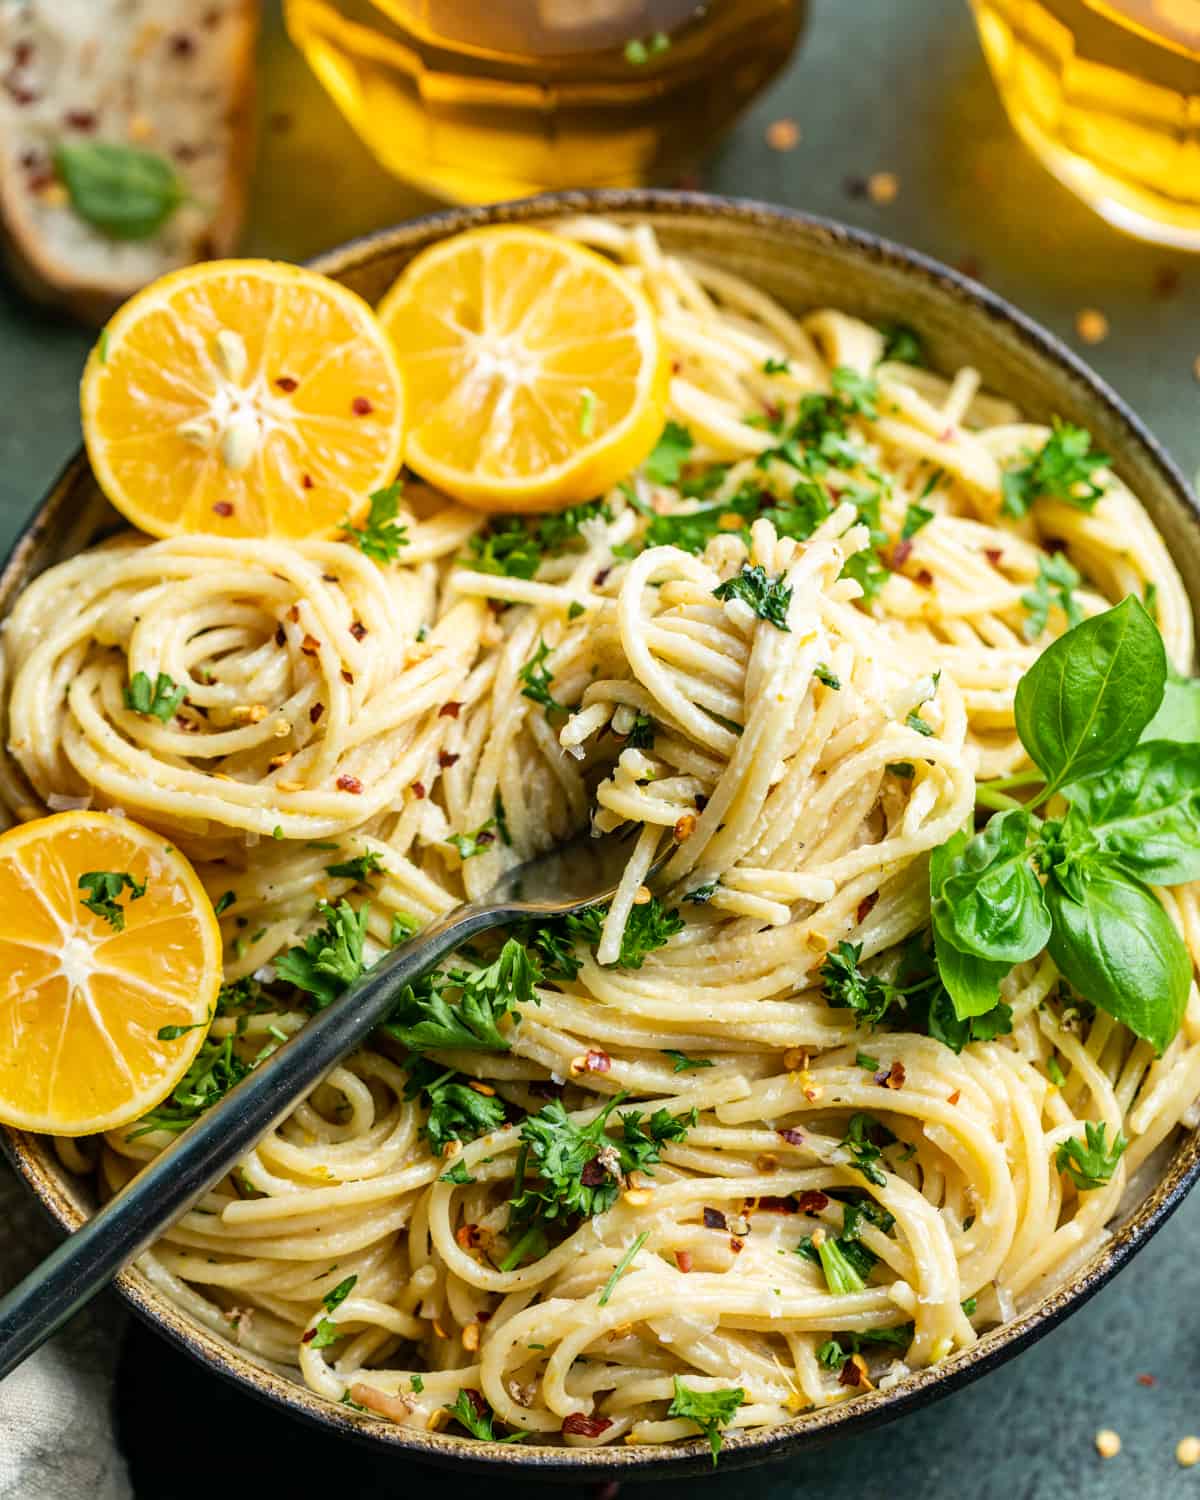 Lemon Butter Pasta Sauce Recipe – Step By Step Guide